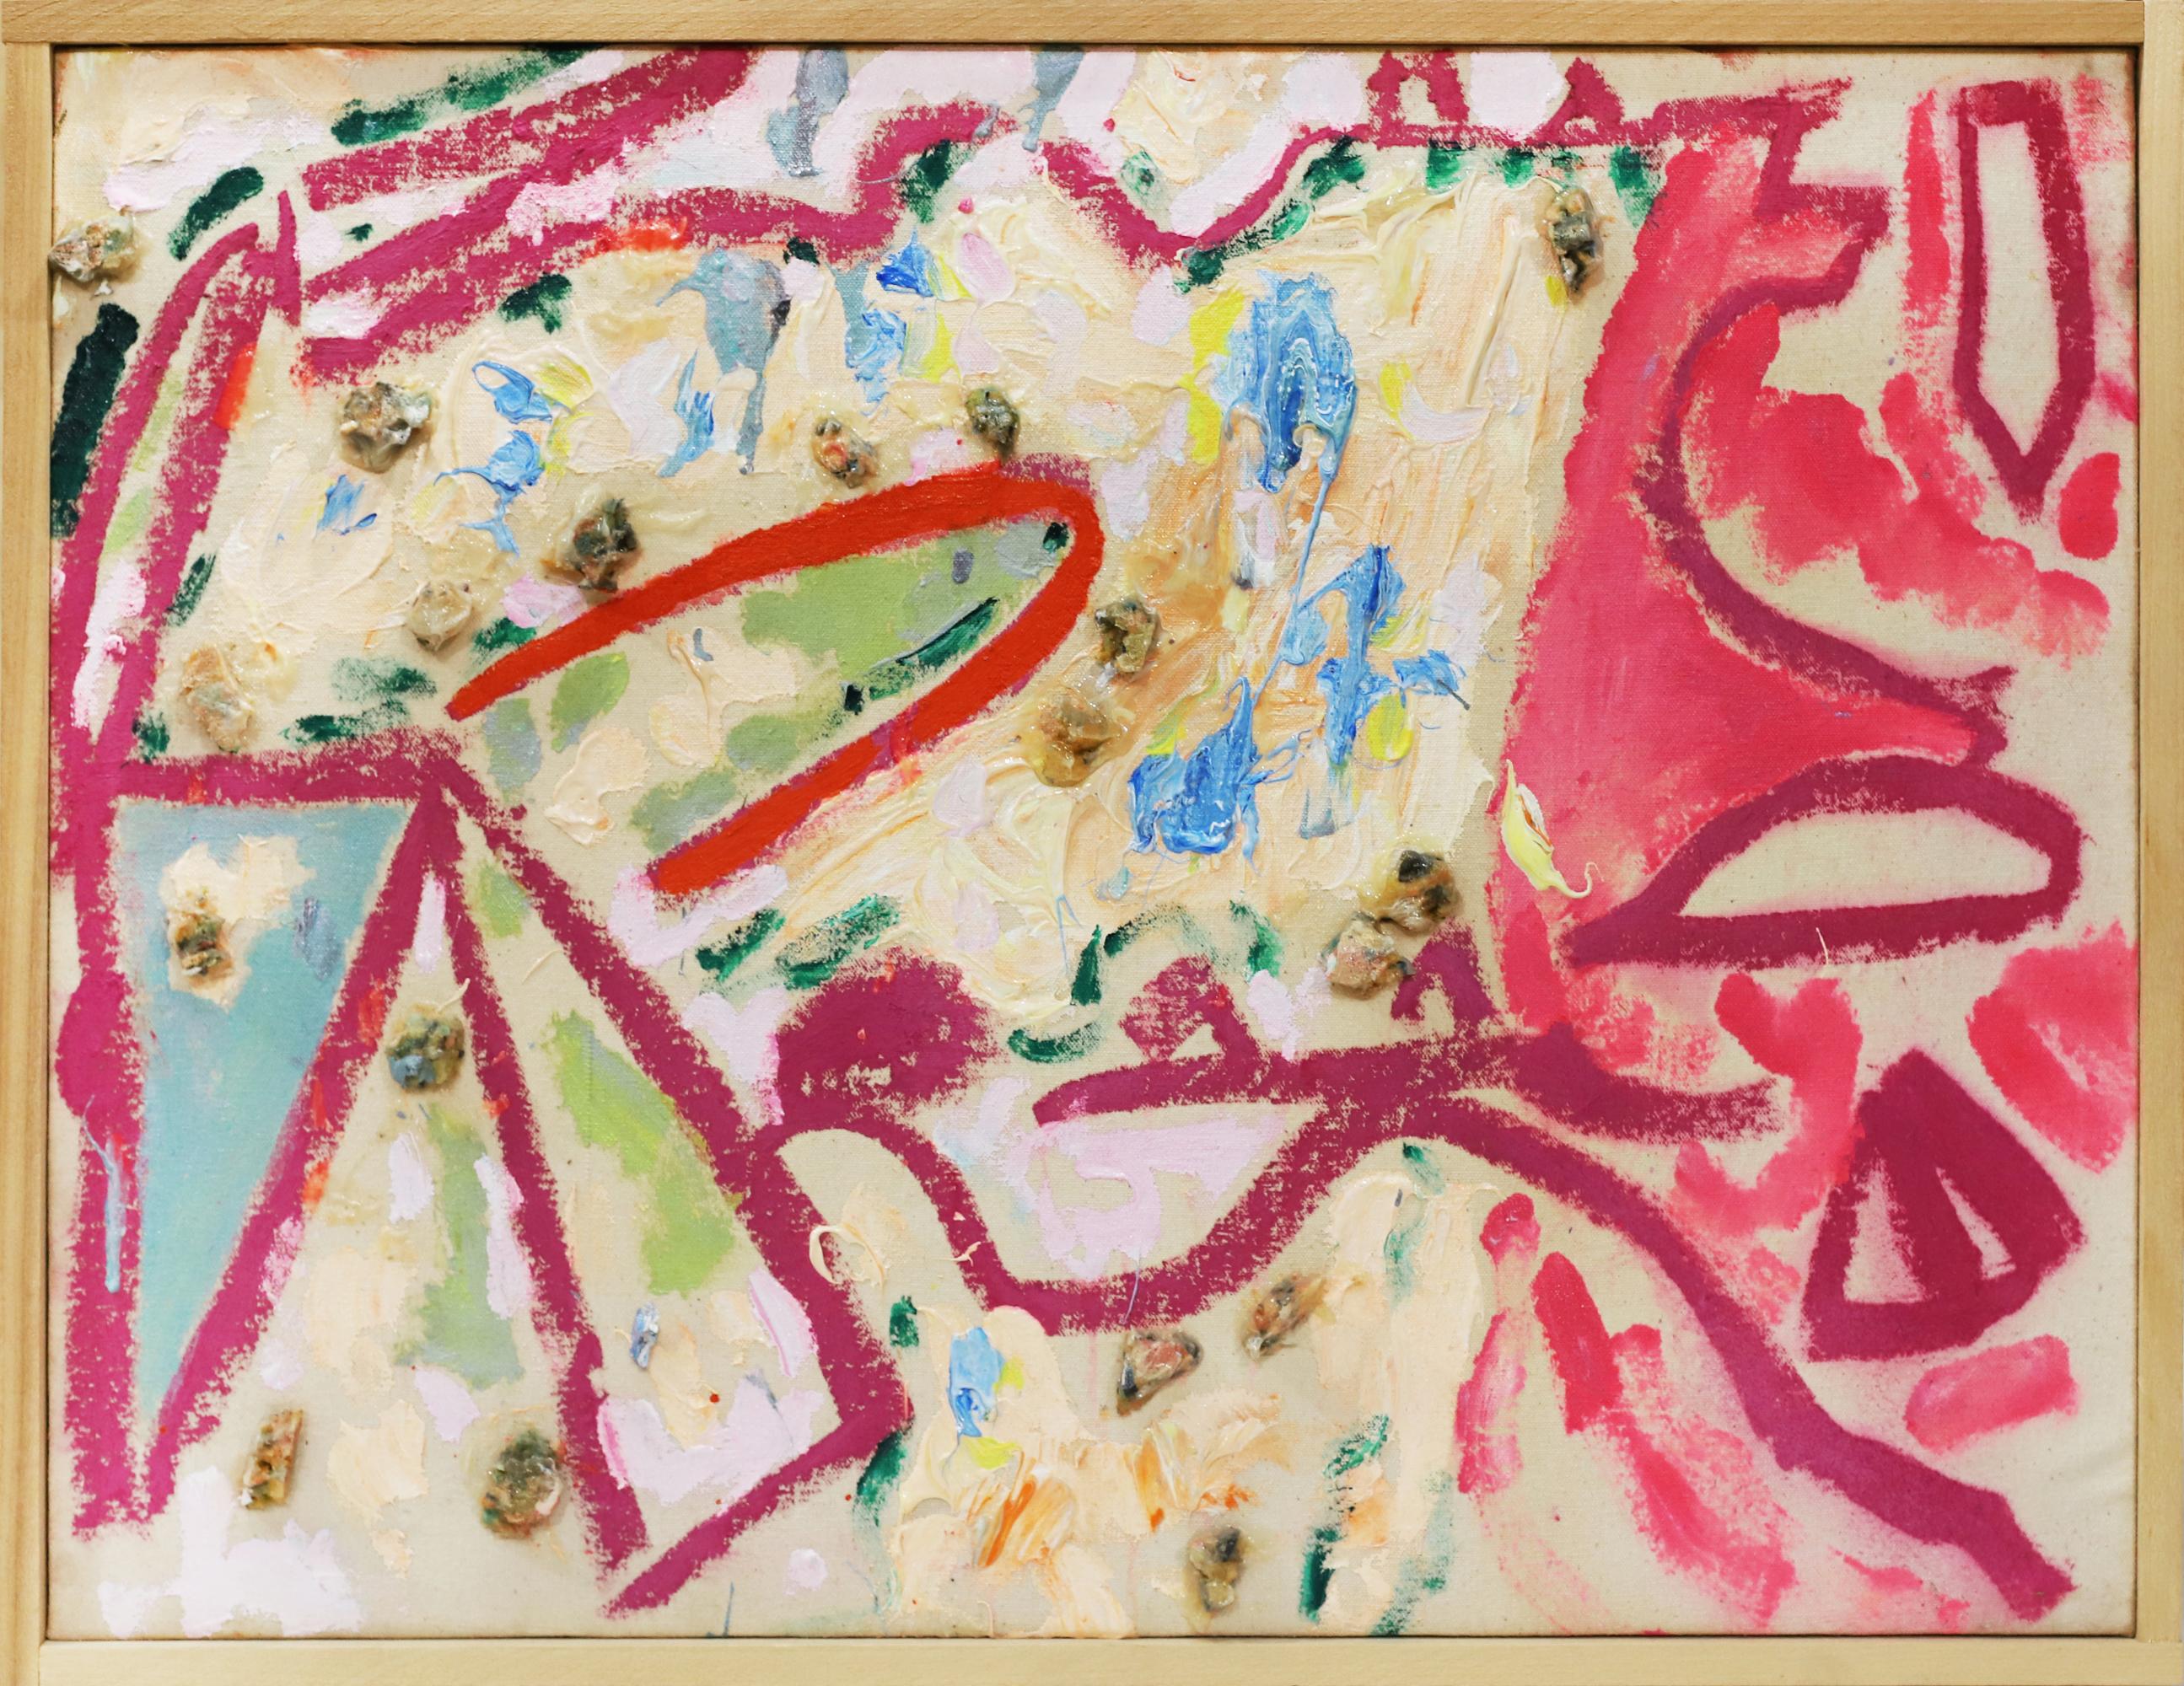 01AS-3 - Painting by Larry Poons